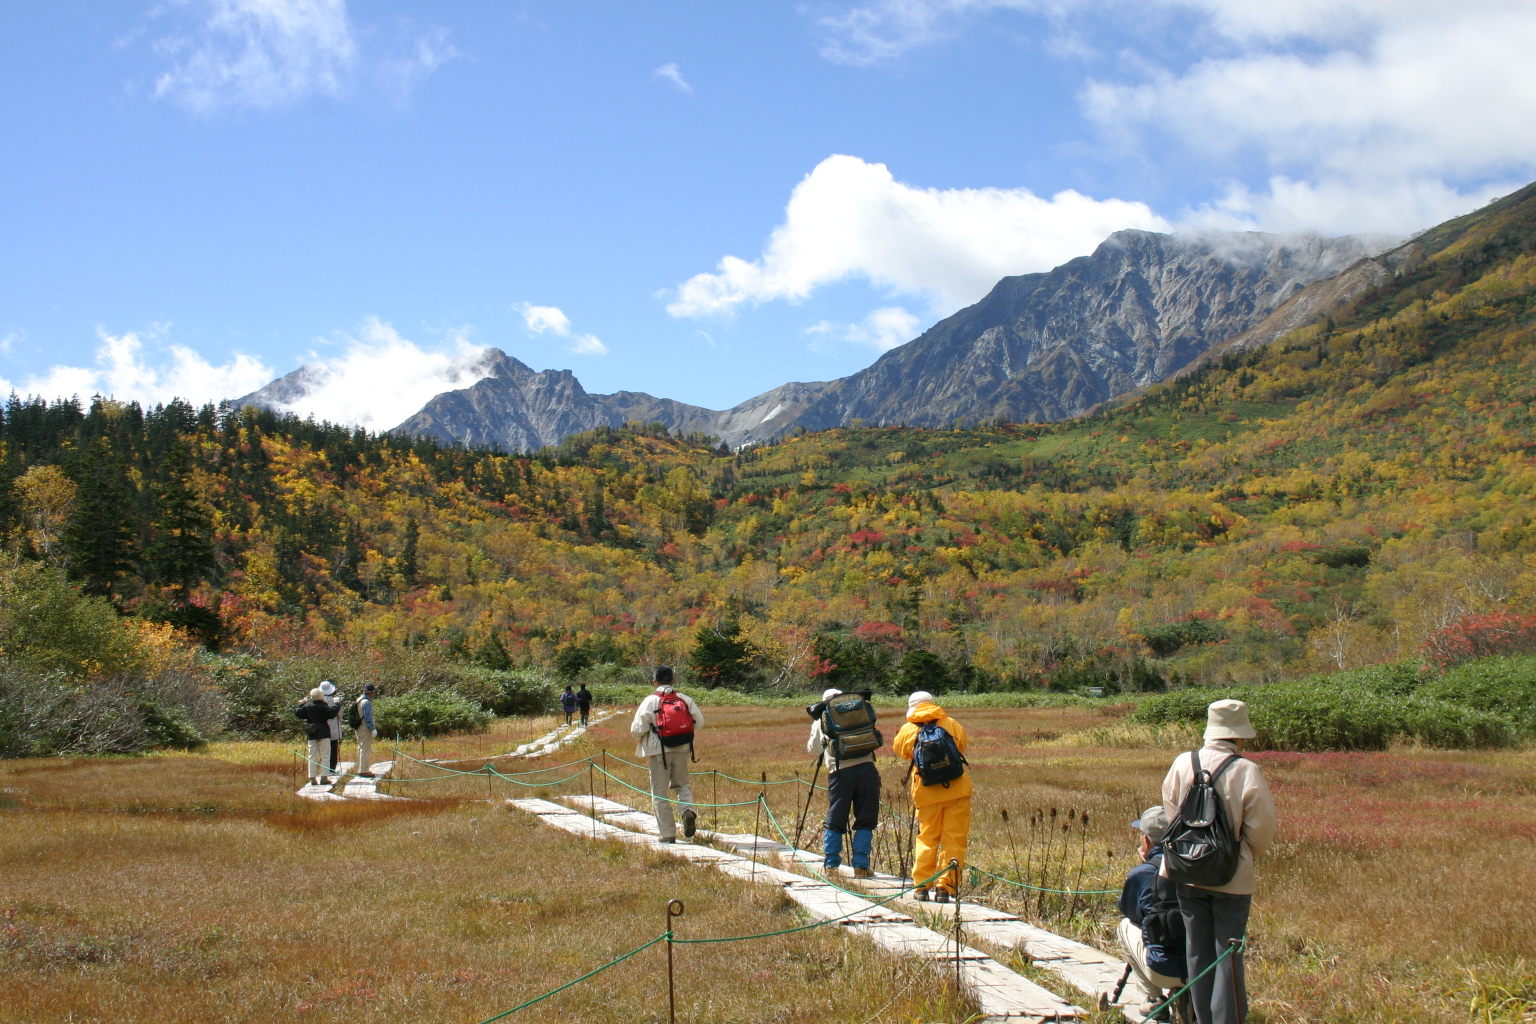 Groups of hikers walk along a wooden boardwalk through a highland marsh below the Northern Japanese Alps